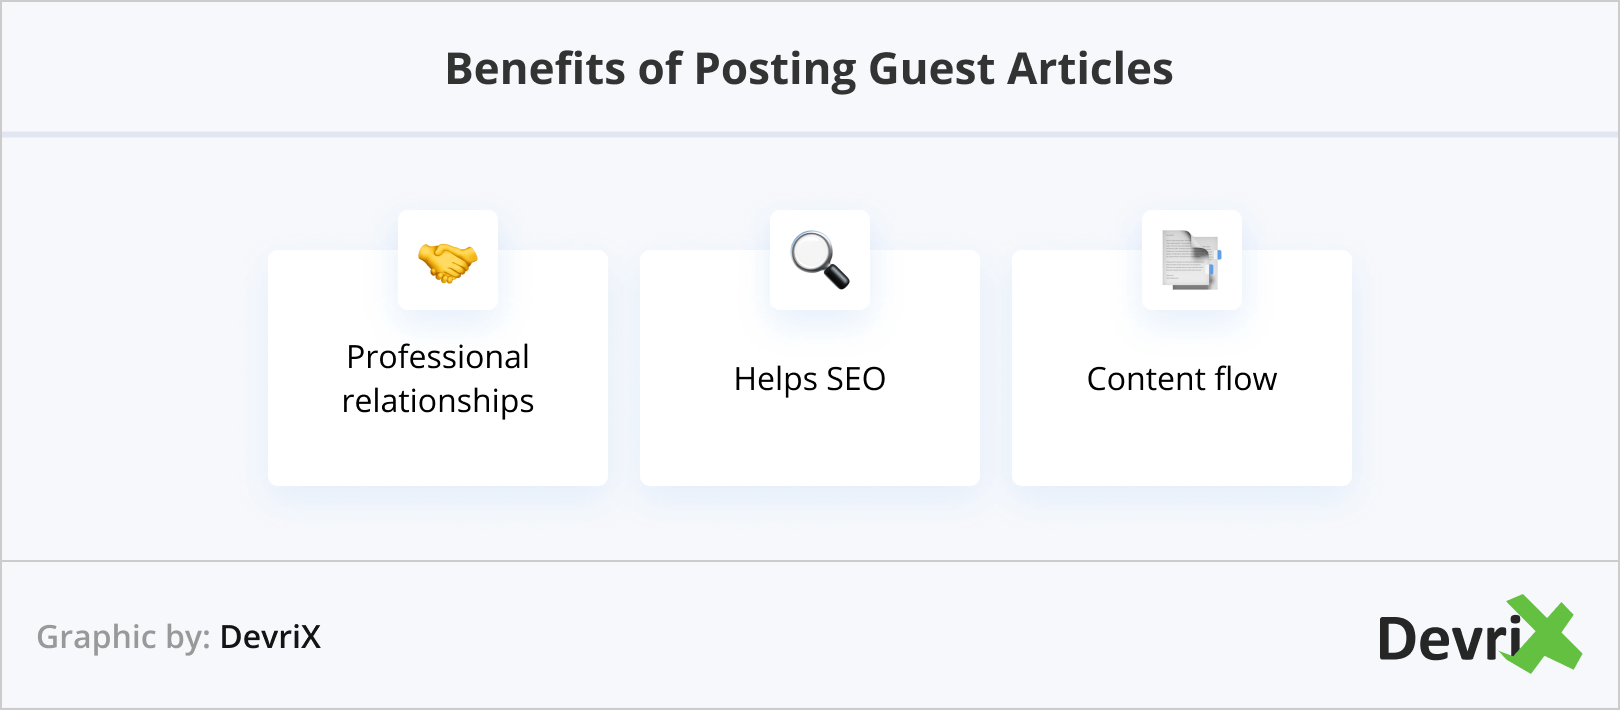 Benefits of Posting Guest Articles